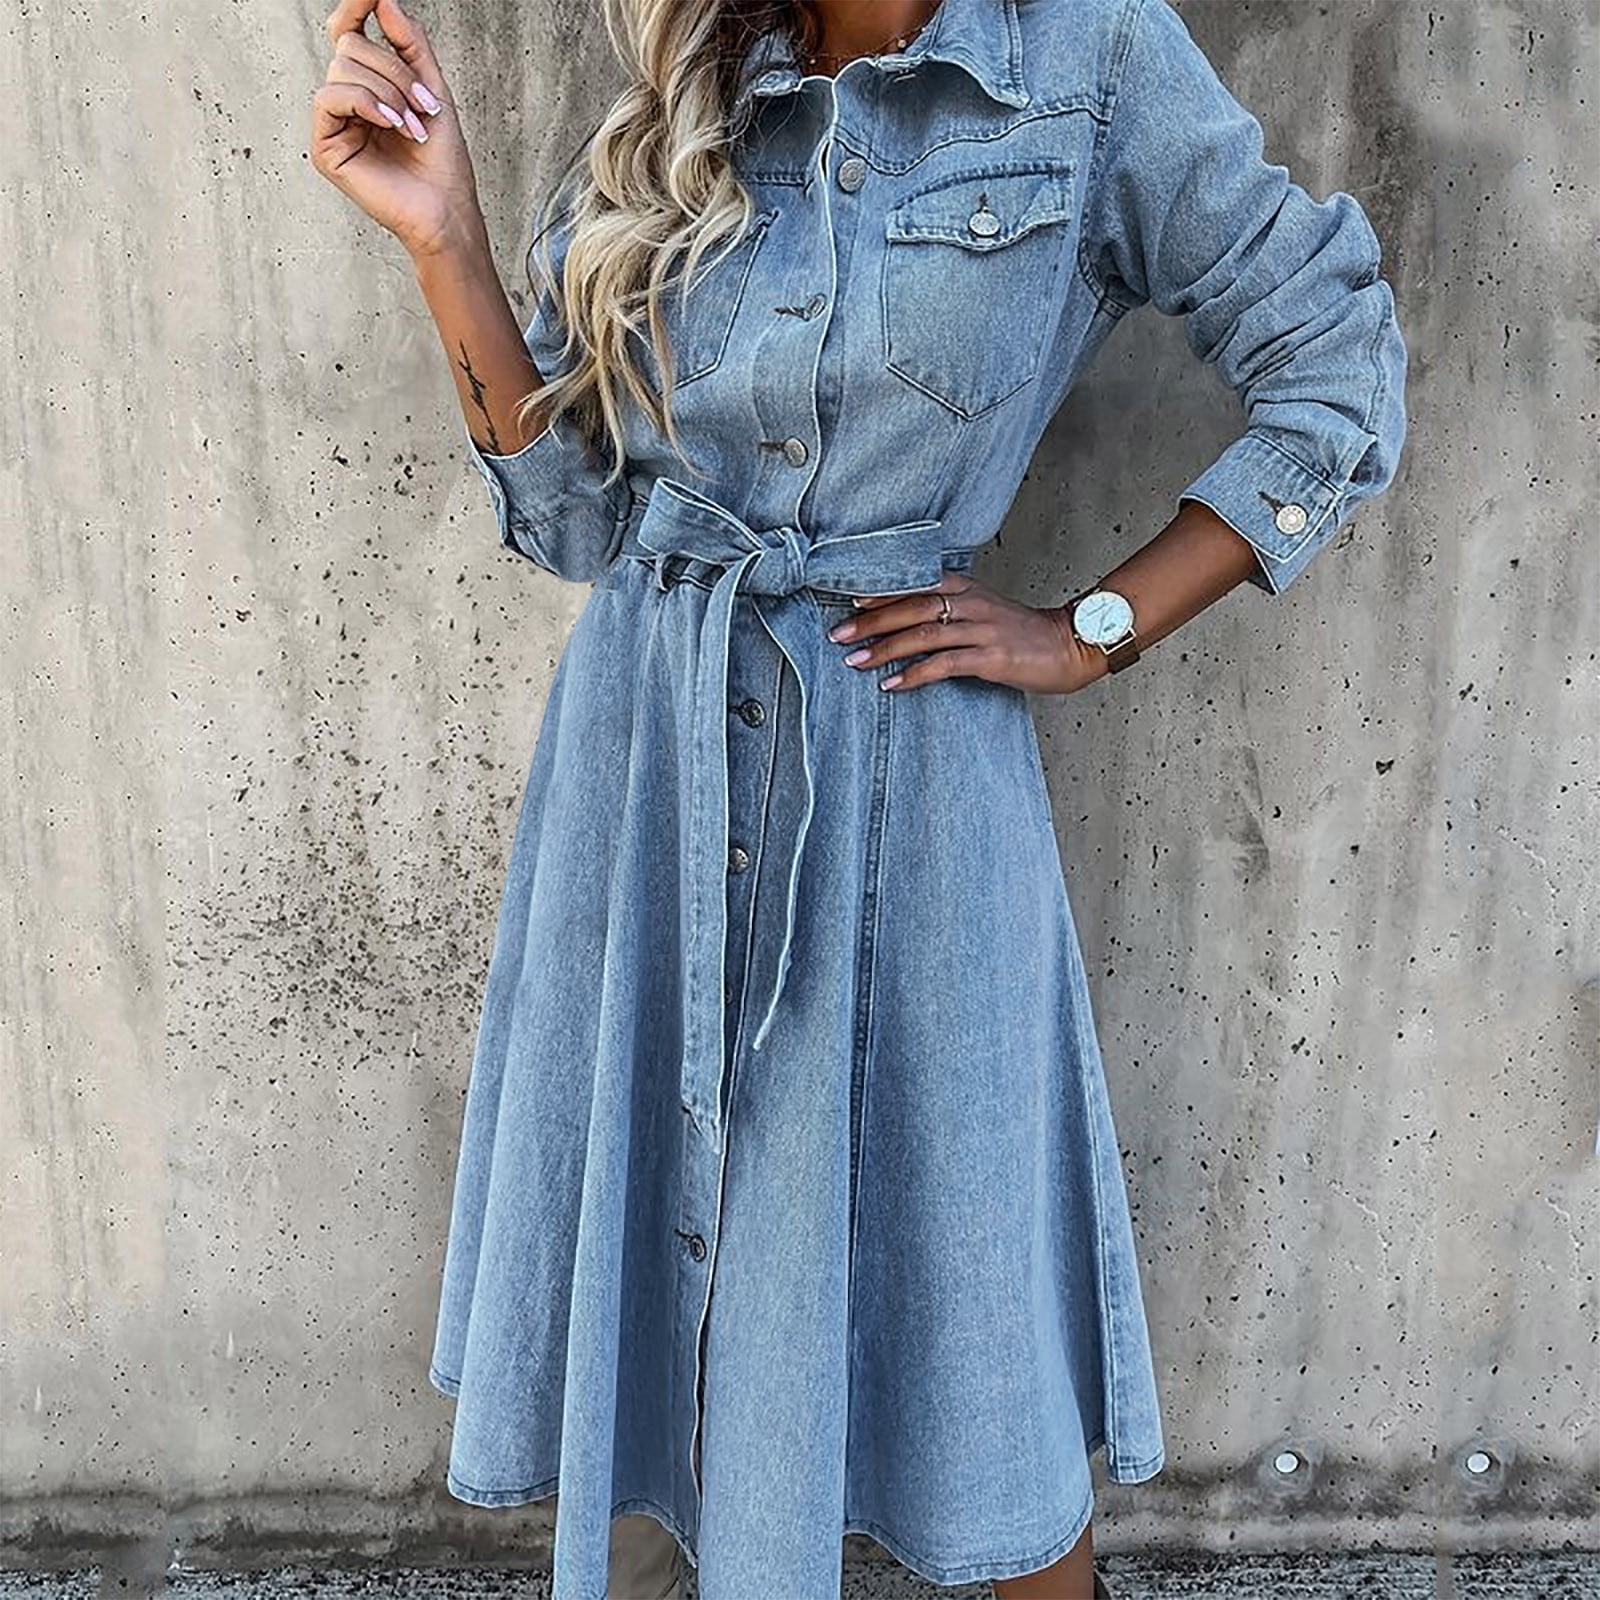 Women's Denim Dresses - Clothing | Stylicy India